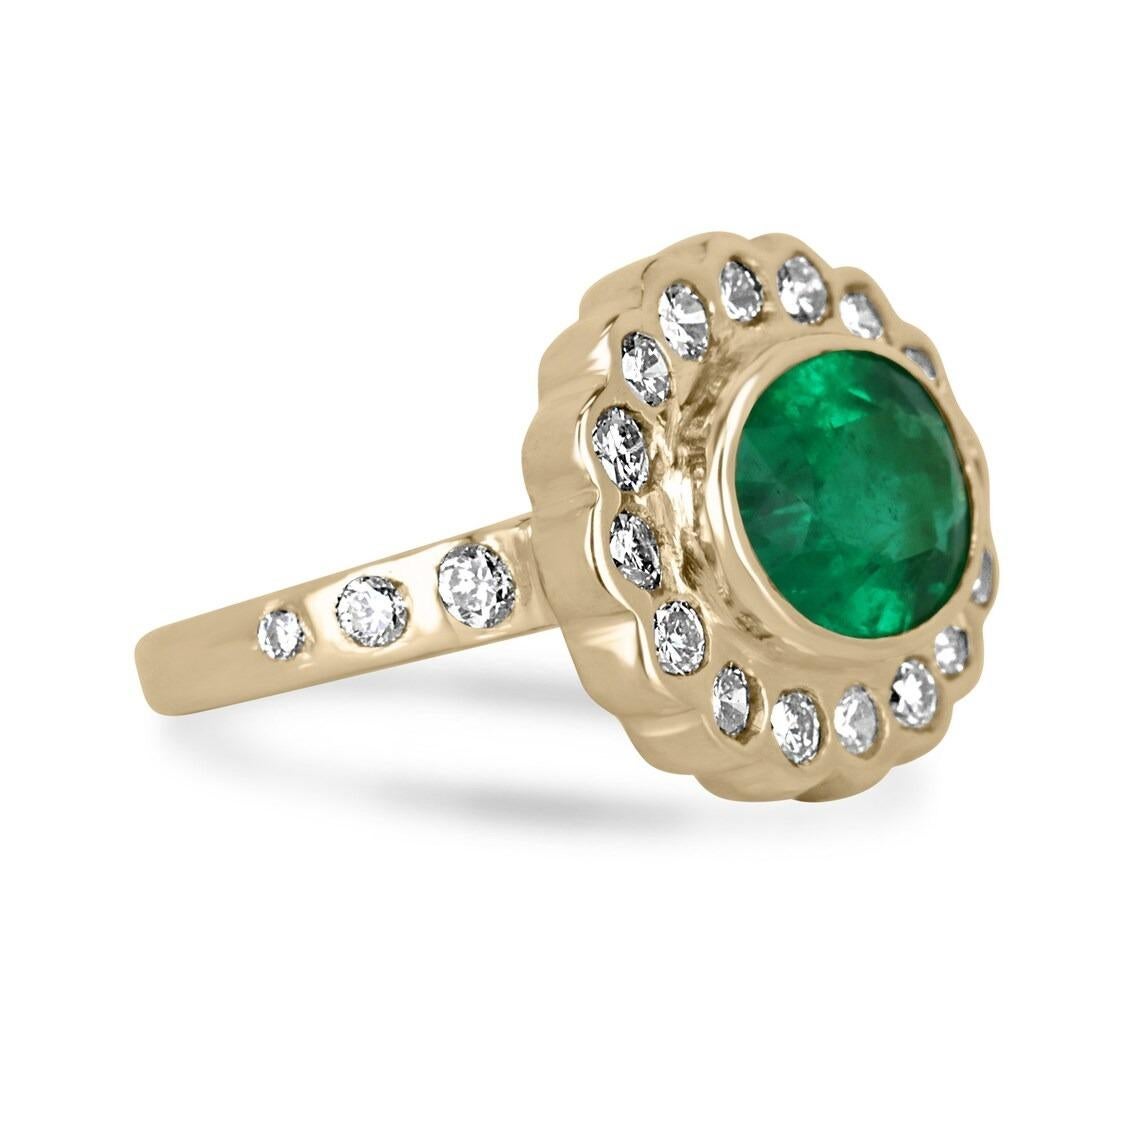 This stunning ring features a Colombian emerald of exceptional quality, cut into an elegant oval shape and set in 18k gold. The rich, dark green color of the emerald is truly vivid and eye-catching. The center stone is surrounded by a sparkling halo